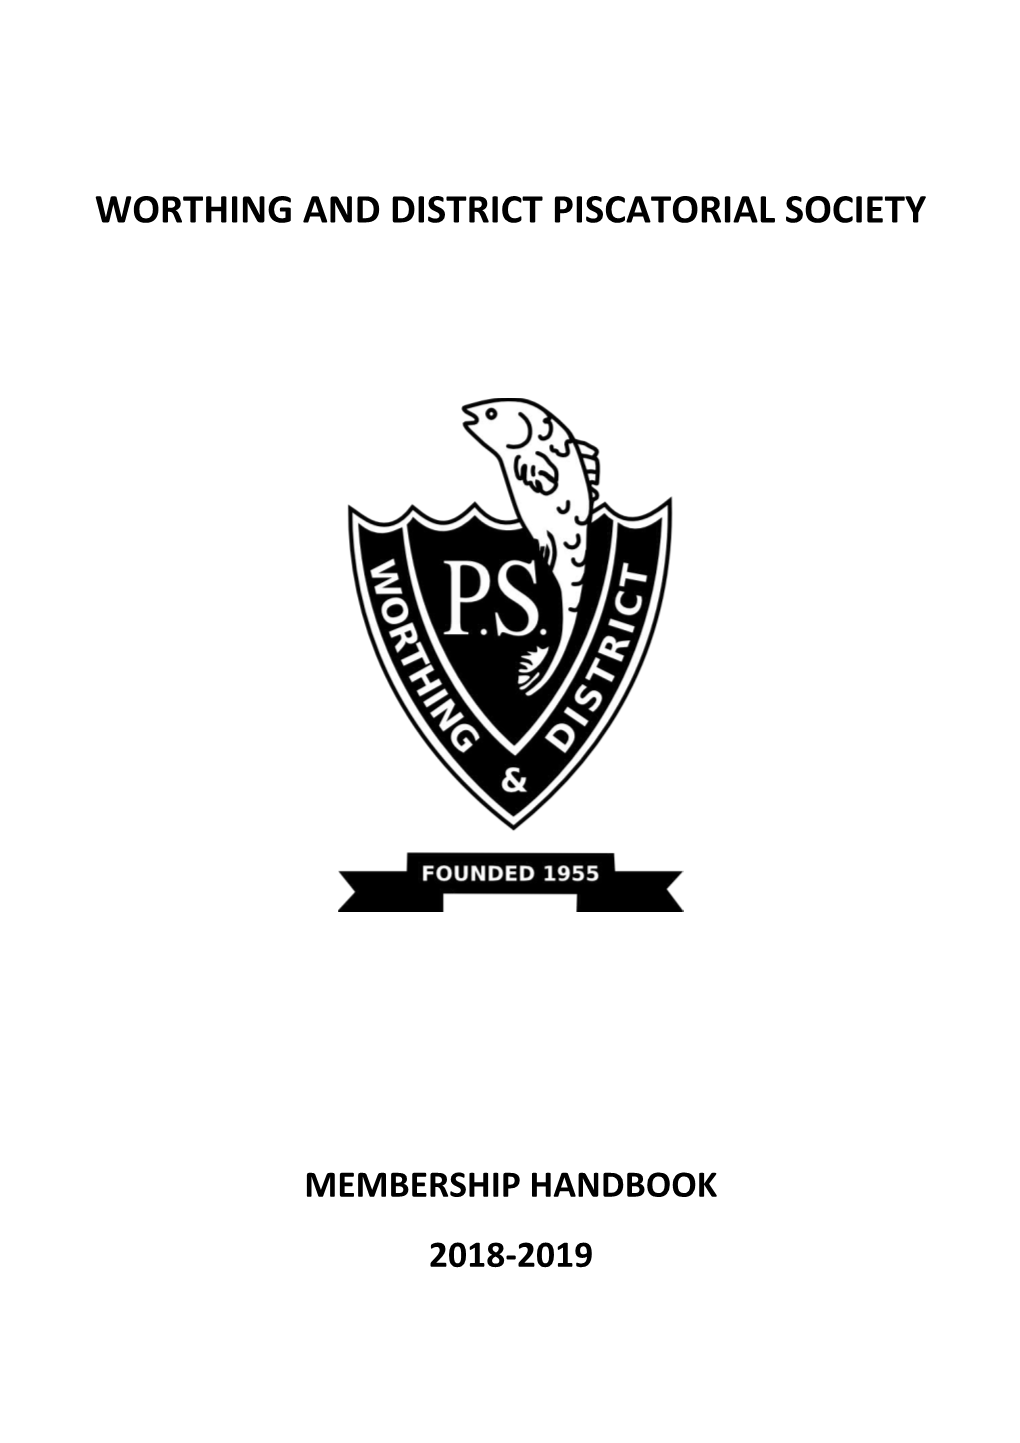 Worthing and District Piscatorial Society